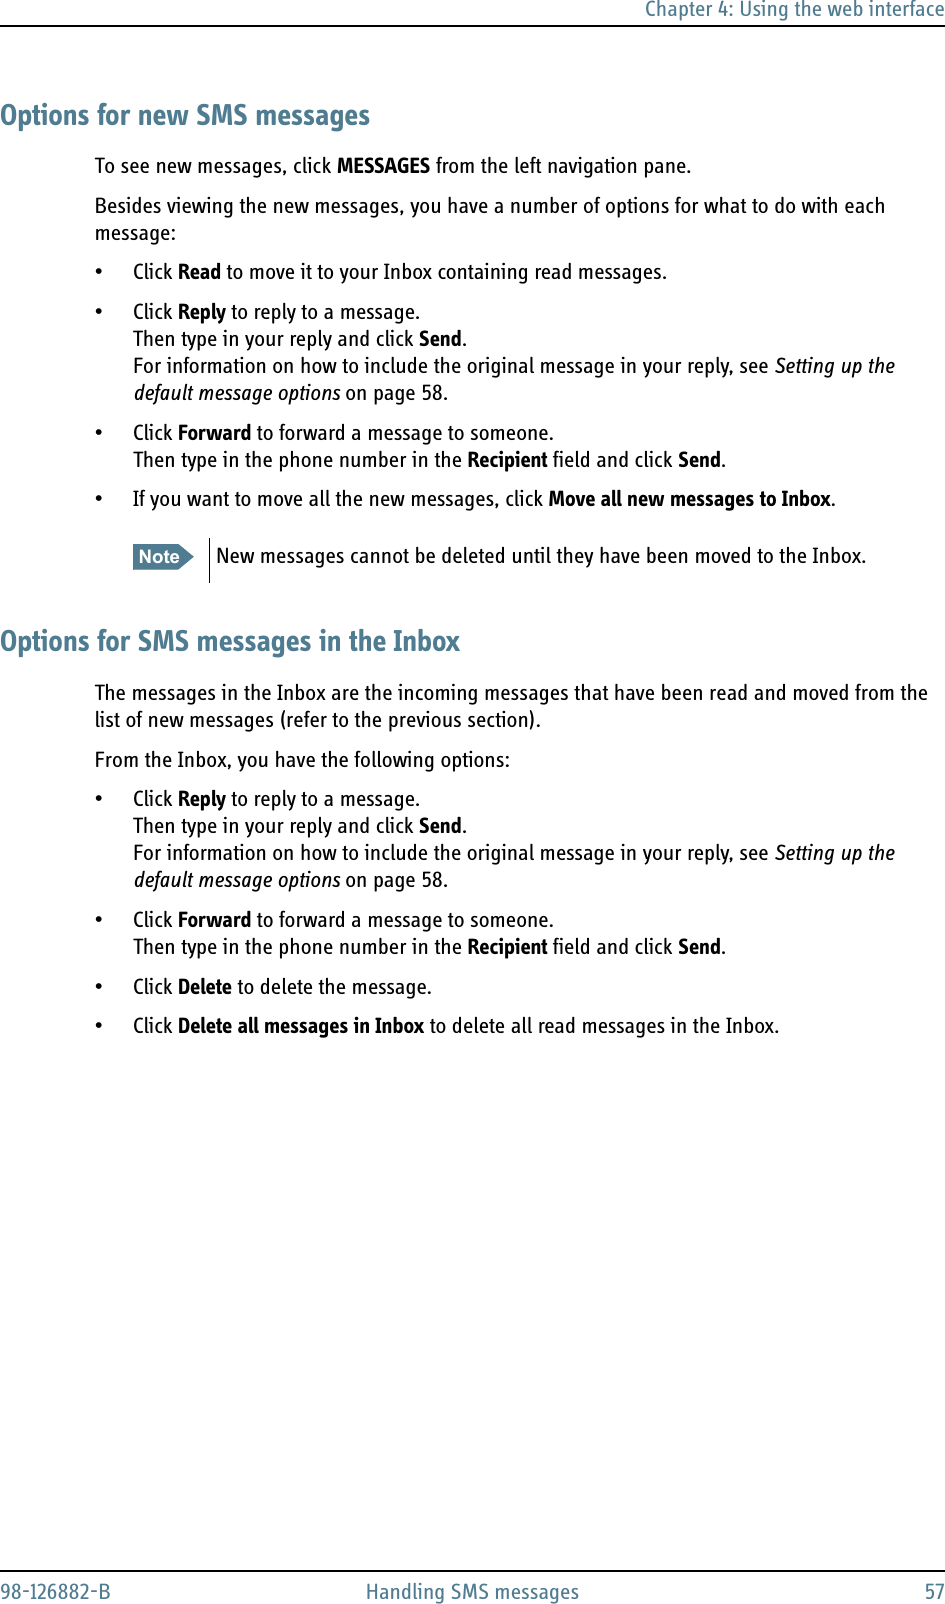 Chapter 4: Using the web interface98-126882-B Handling SMS messages 57Options for new SMS messagesTo see new messages, click MESSAGES from the left navigation pane. Besides viewing the new messages, you have a number of options for what to do with each message:• Click Read to move it to your Inbox containing read messages.• Click Reply to reply to a message. Then type in your reply and click Send.For information on how to include the original message in your reply, see Setting up the default message options on page 58.• Click Forward to forward a message to someone. Then type in the phone number in the Recipient field and click Send.• If you want to move all the new messages, click Move all new messages to Inbox.Options for SMS messages in the InboxThe messages in the Inbox are the incoming messages that have been read and moved from the list of new messages (refer to the previous section).From the Inbox, you have the following options:• Click Reply to reply to a message. Then type in your reply and click Send.For information on how to include the original message in your reply, see Setting up the default message options on page 58.• Click Forward to forward a message to someone. Then type in the phone number in the Recipient field and click Send.• Click Delete to delete the message. • Click Delete all messages in Inbox to delete all read messages in the Inbox. Note New messages cannot be deleted until they have been moved to the Inbox.